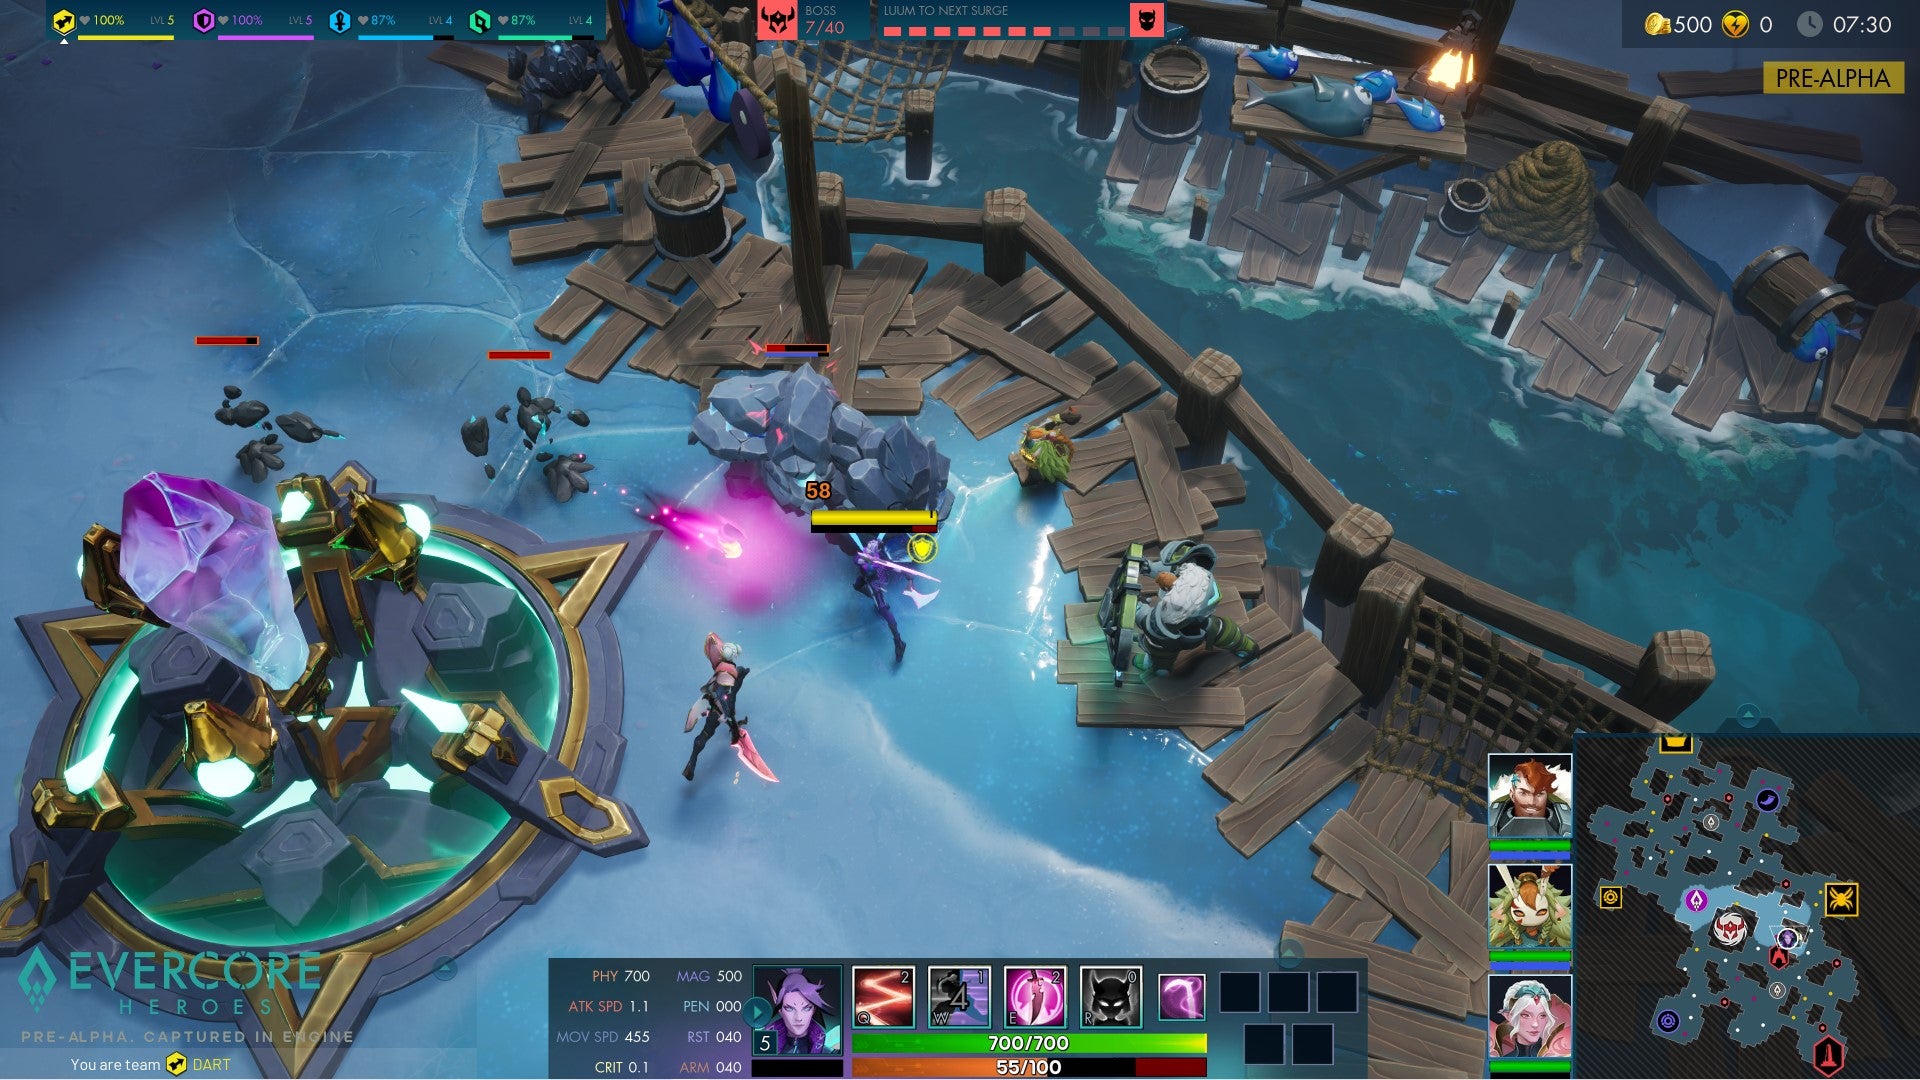 Heroes defend their Evercore from rock monsters in an icey arena in Evercore Heroes.